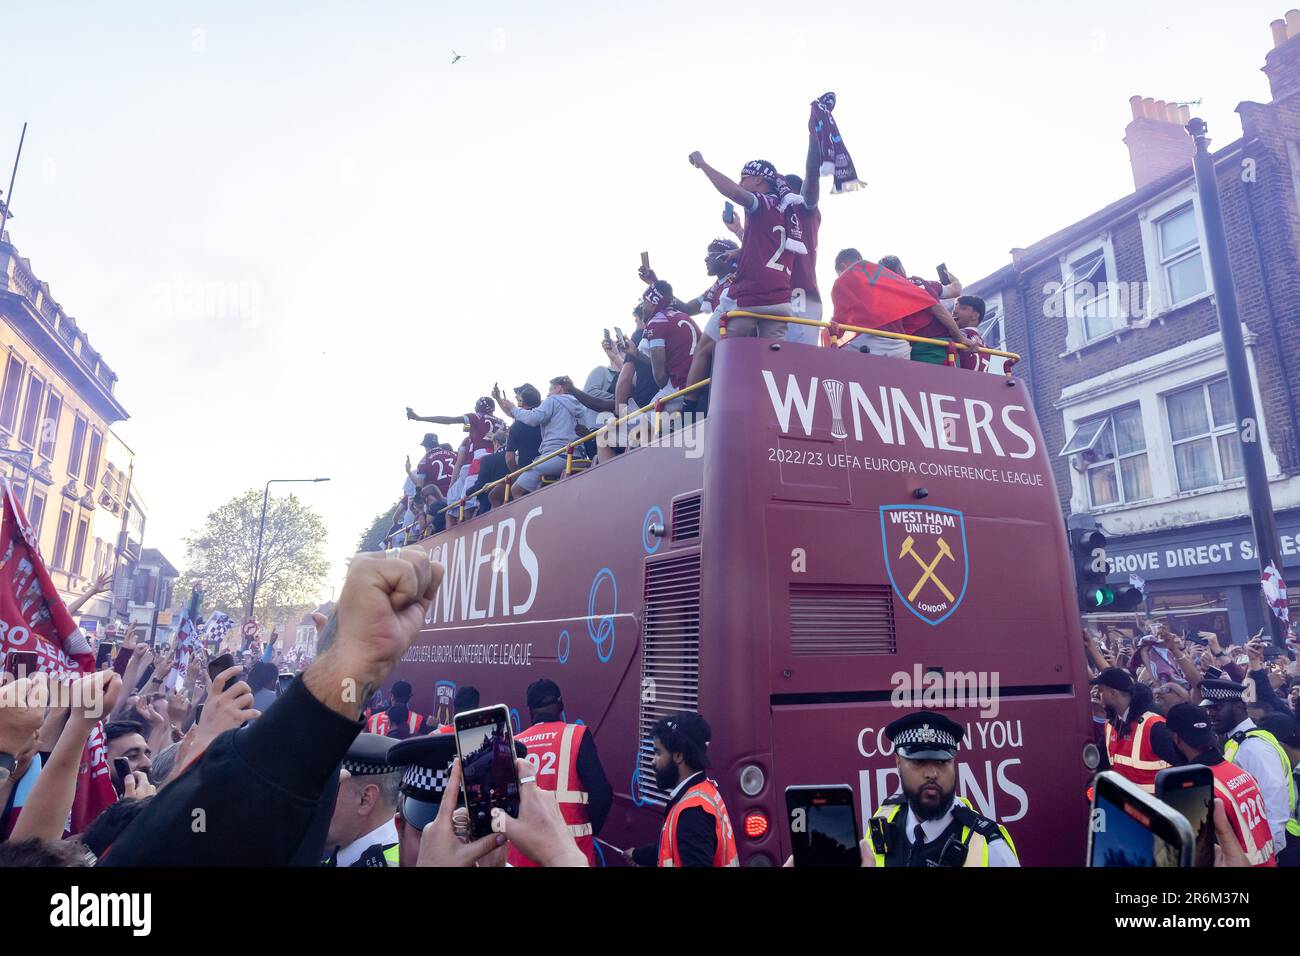 London, UK. 8th June, 2023. West Ham United footballers receive a hero's welcome from supporters in Barking Road close to the club's former Boleyn Ground stadium in Upton Park during a UEFA Europa Conference League victory parade. West Ham defeated ACF Fiorentina in the UEFA Europa Conference League Final on 7 June, winning their first major trophy since 1980. Credit: Mark Kerrison/Alamy Live News Stock Photo